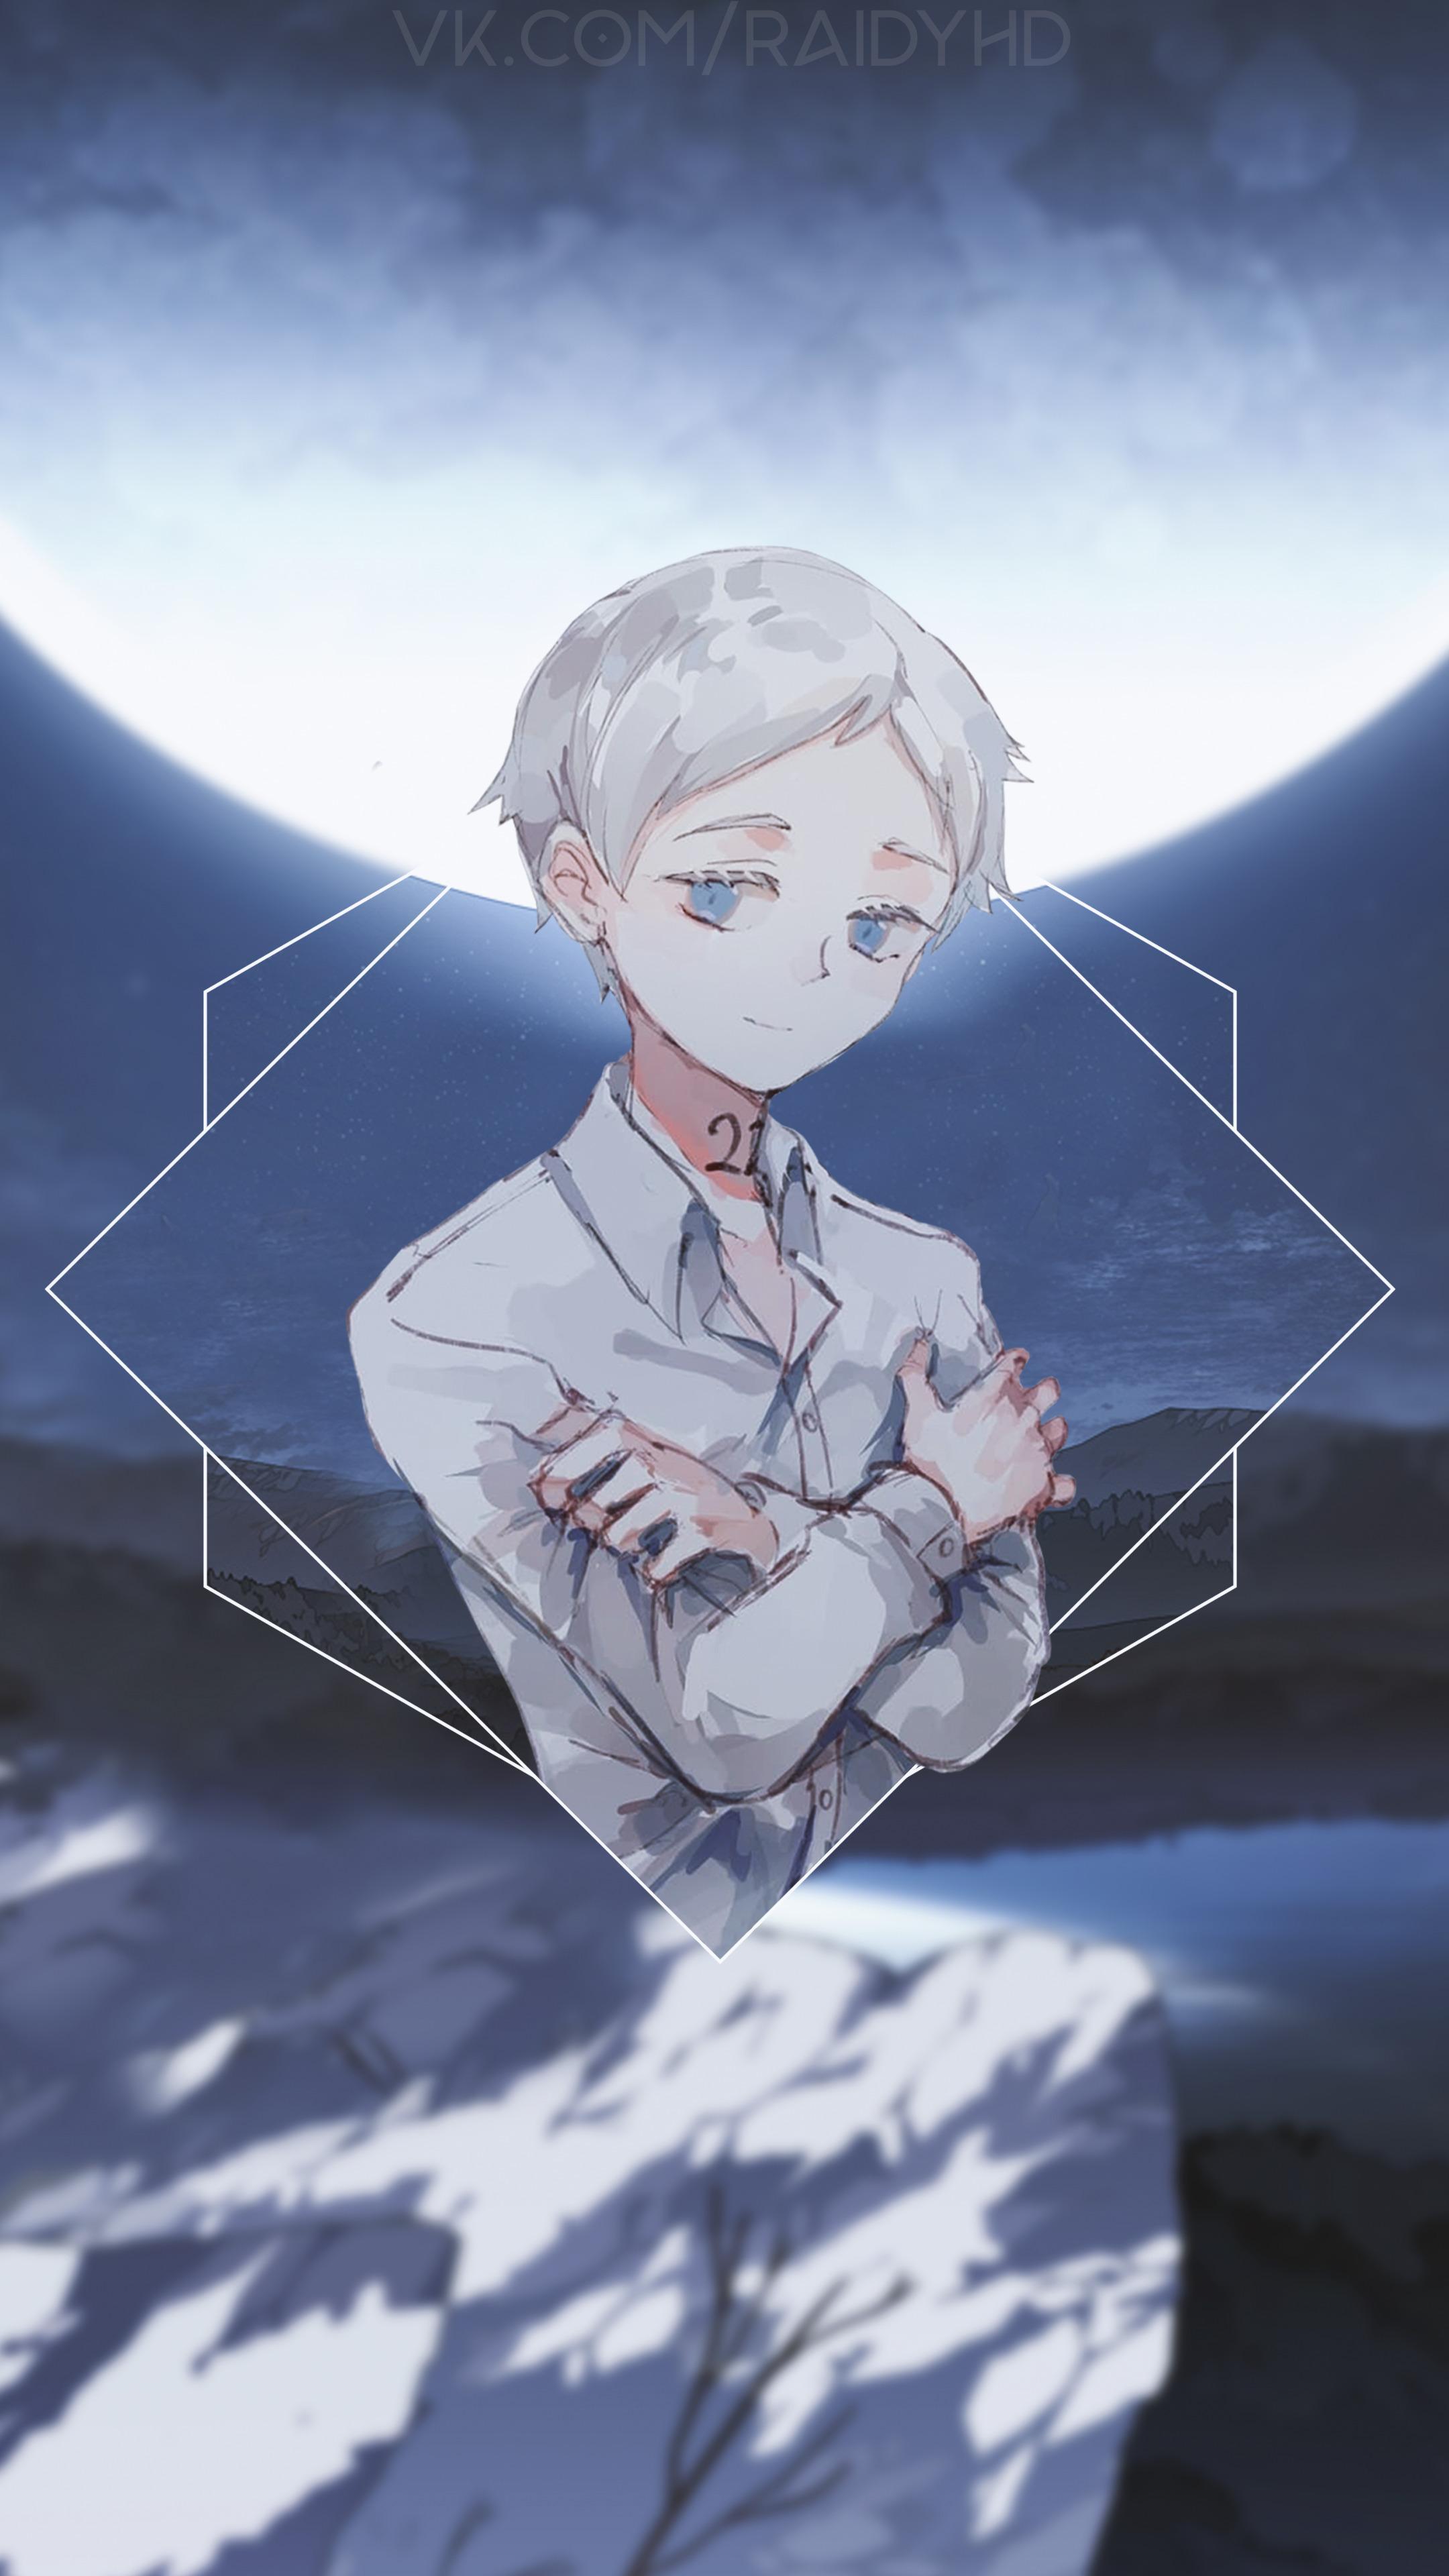 HD wallpaper, Picture In Picture, Anime, Norman The Promised Neverland, Anime Girls